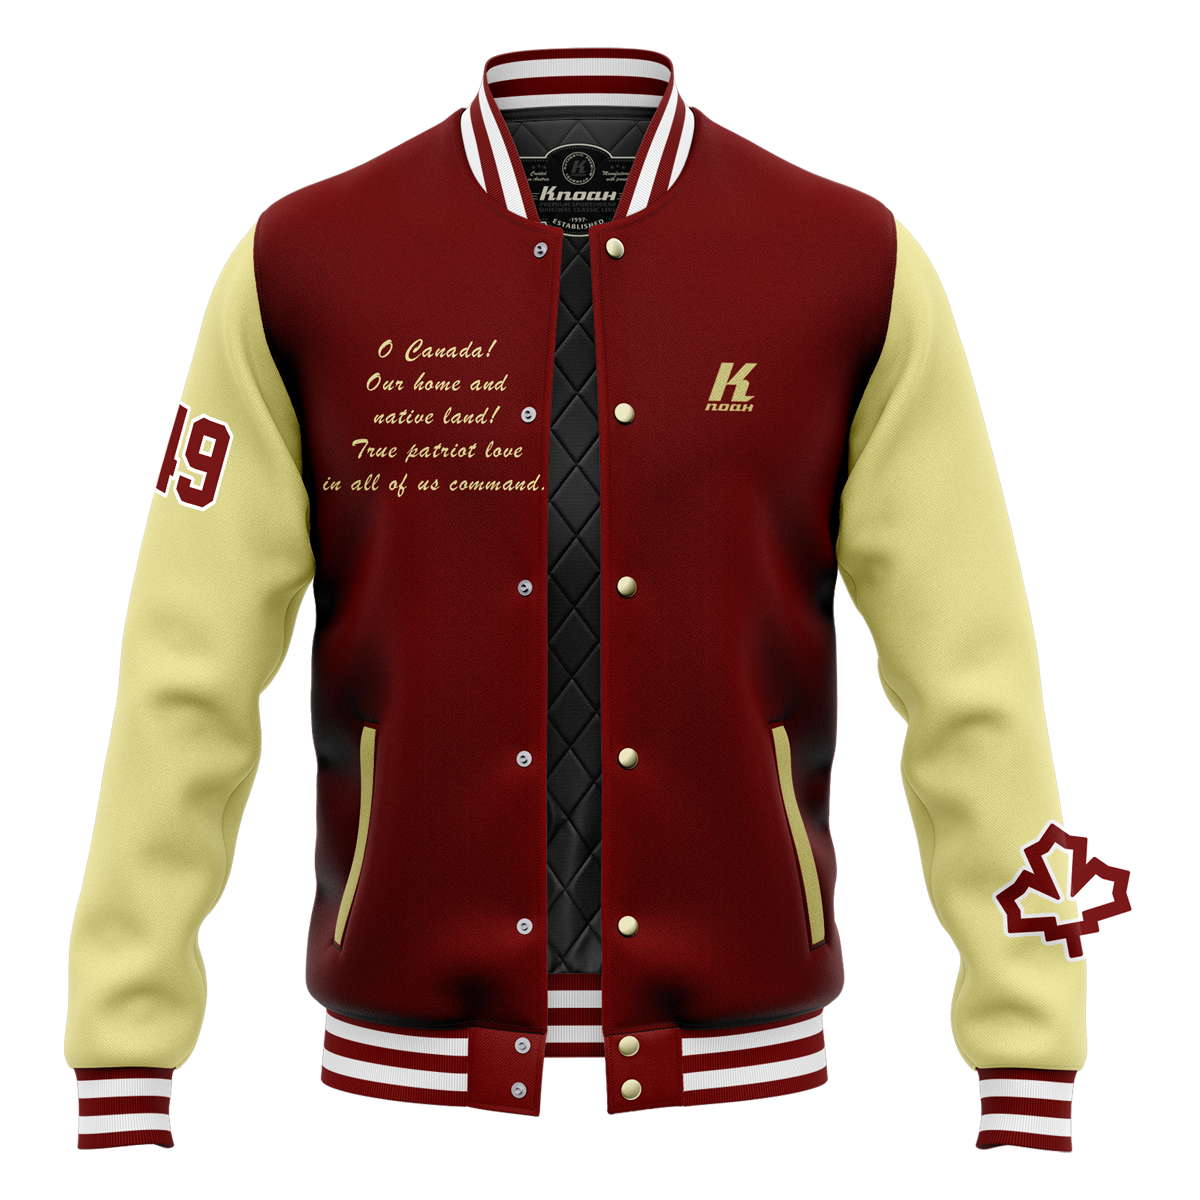 Day 22: "Canada" Authentic Varsity Jacket with Playernumber/Initials